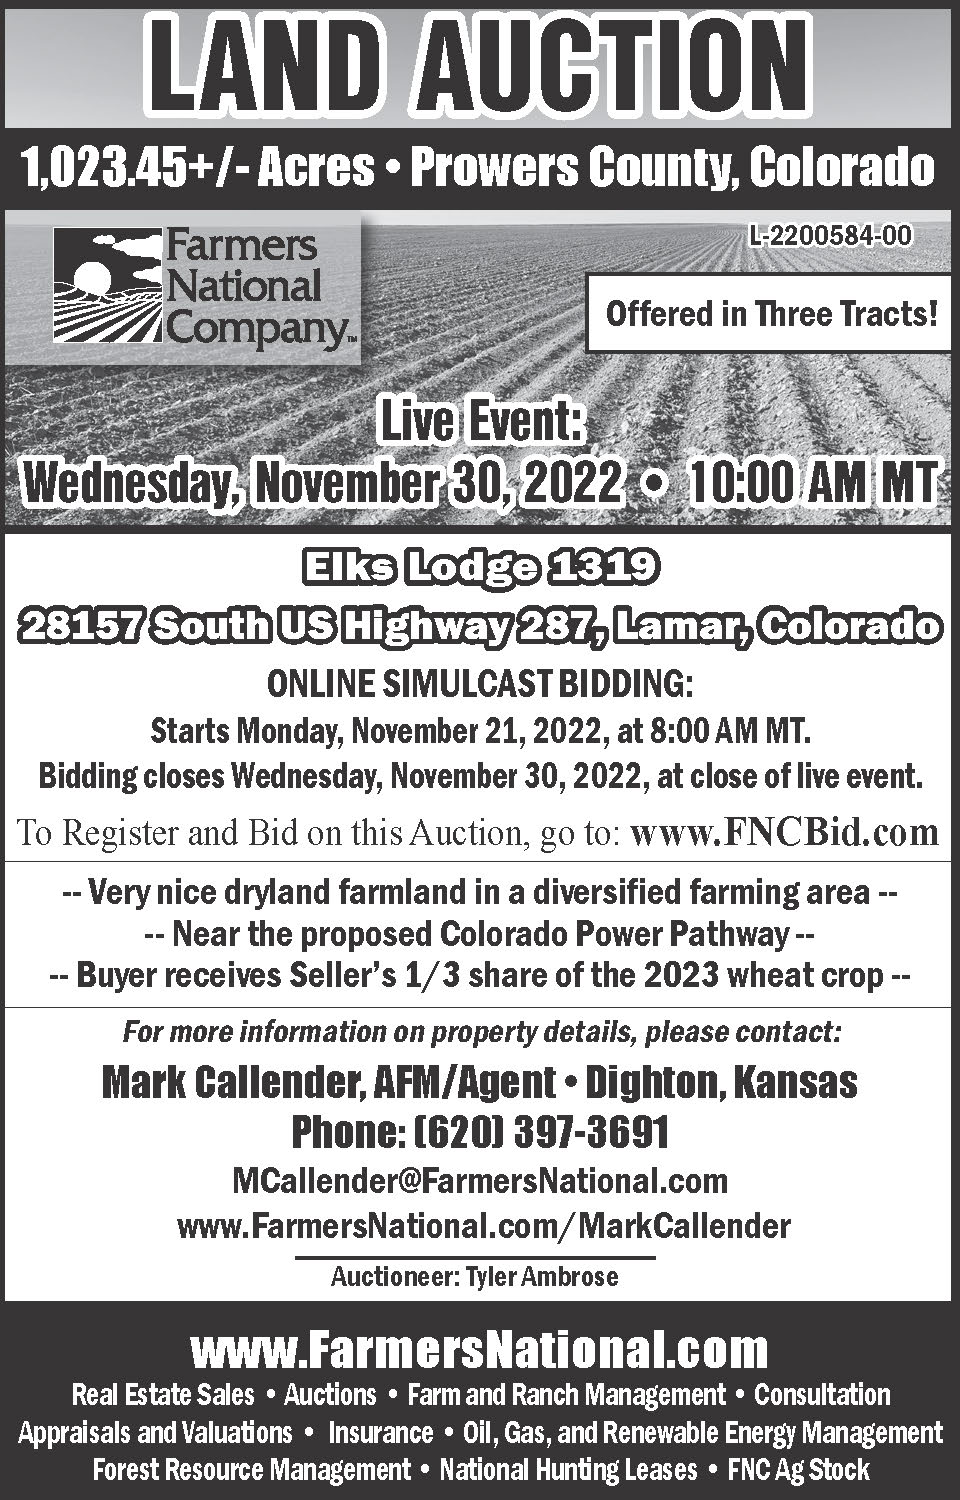 AD 2022-10 Agriculture - Colorado Land Auction - Farmers National Company